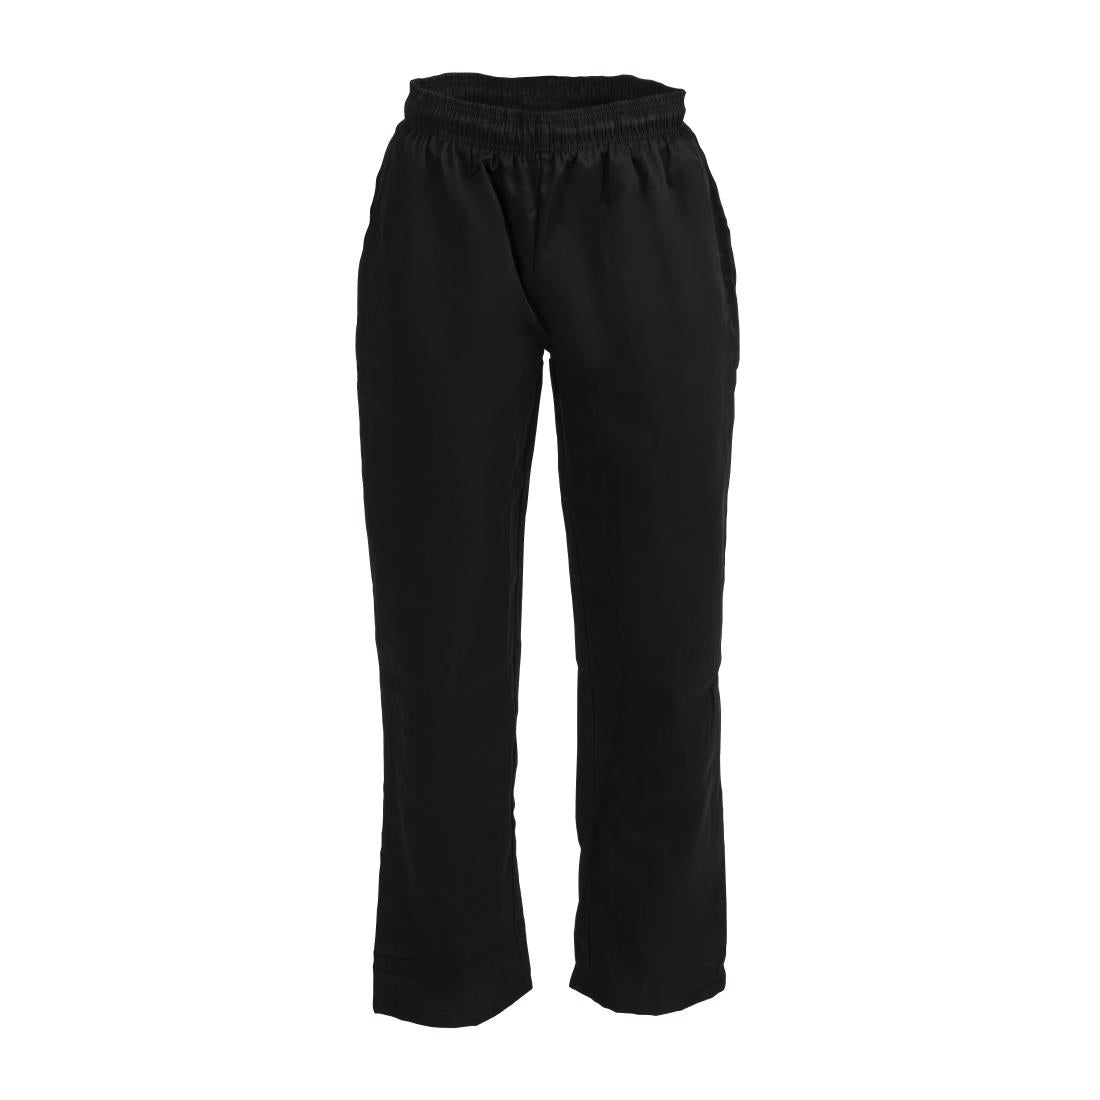 A582-4XL Whites Vegas Chef Trousers Polycotton Black 4XL JD Catering Equipment Solutions Ltd